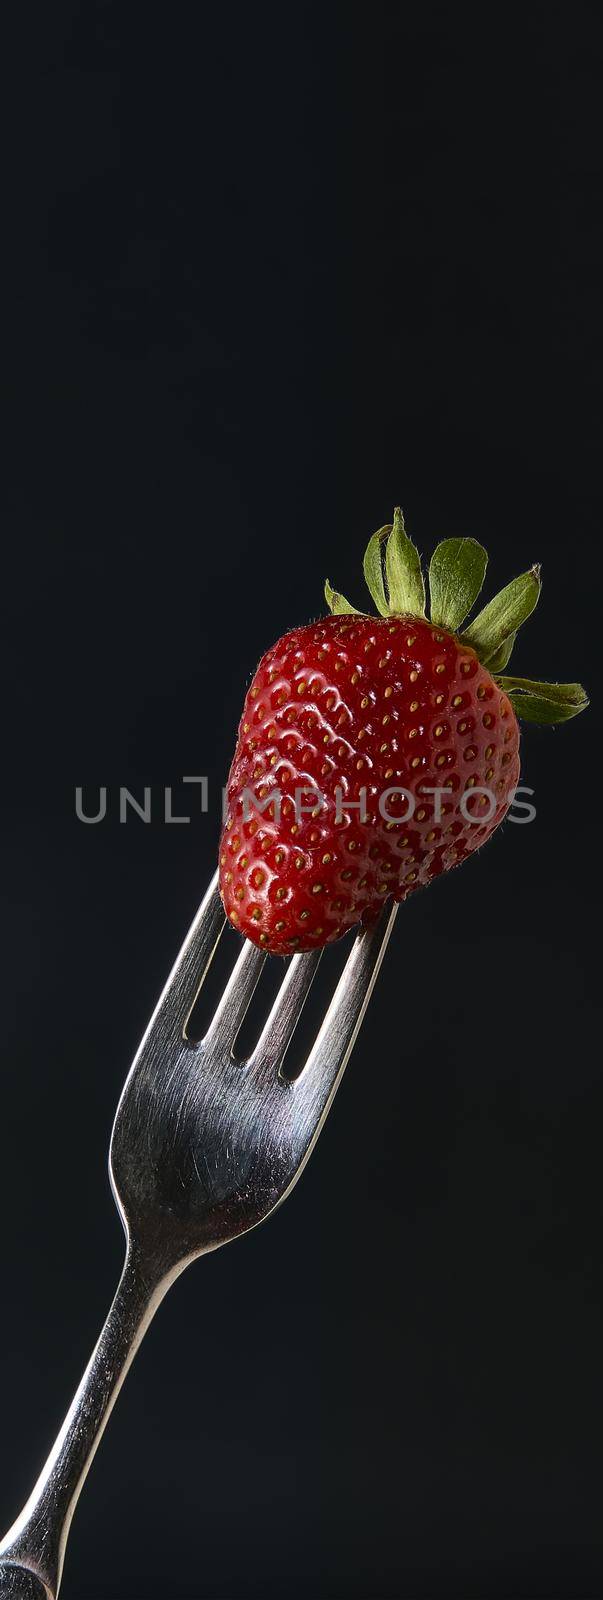 Strawberry banner detail, banner image with copy space